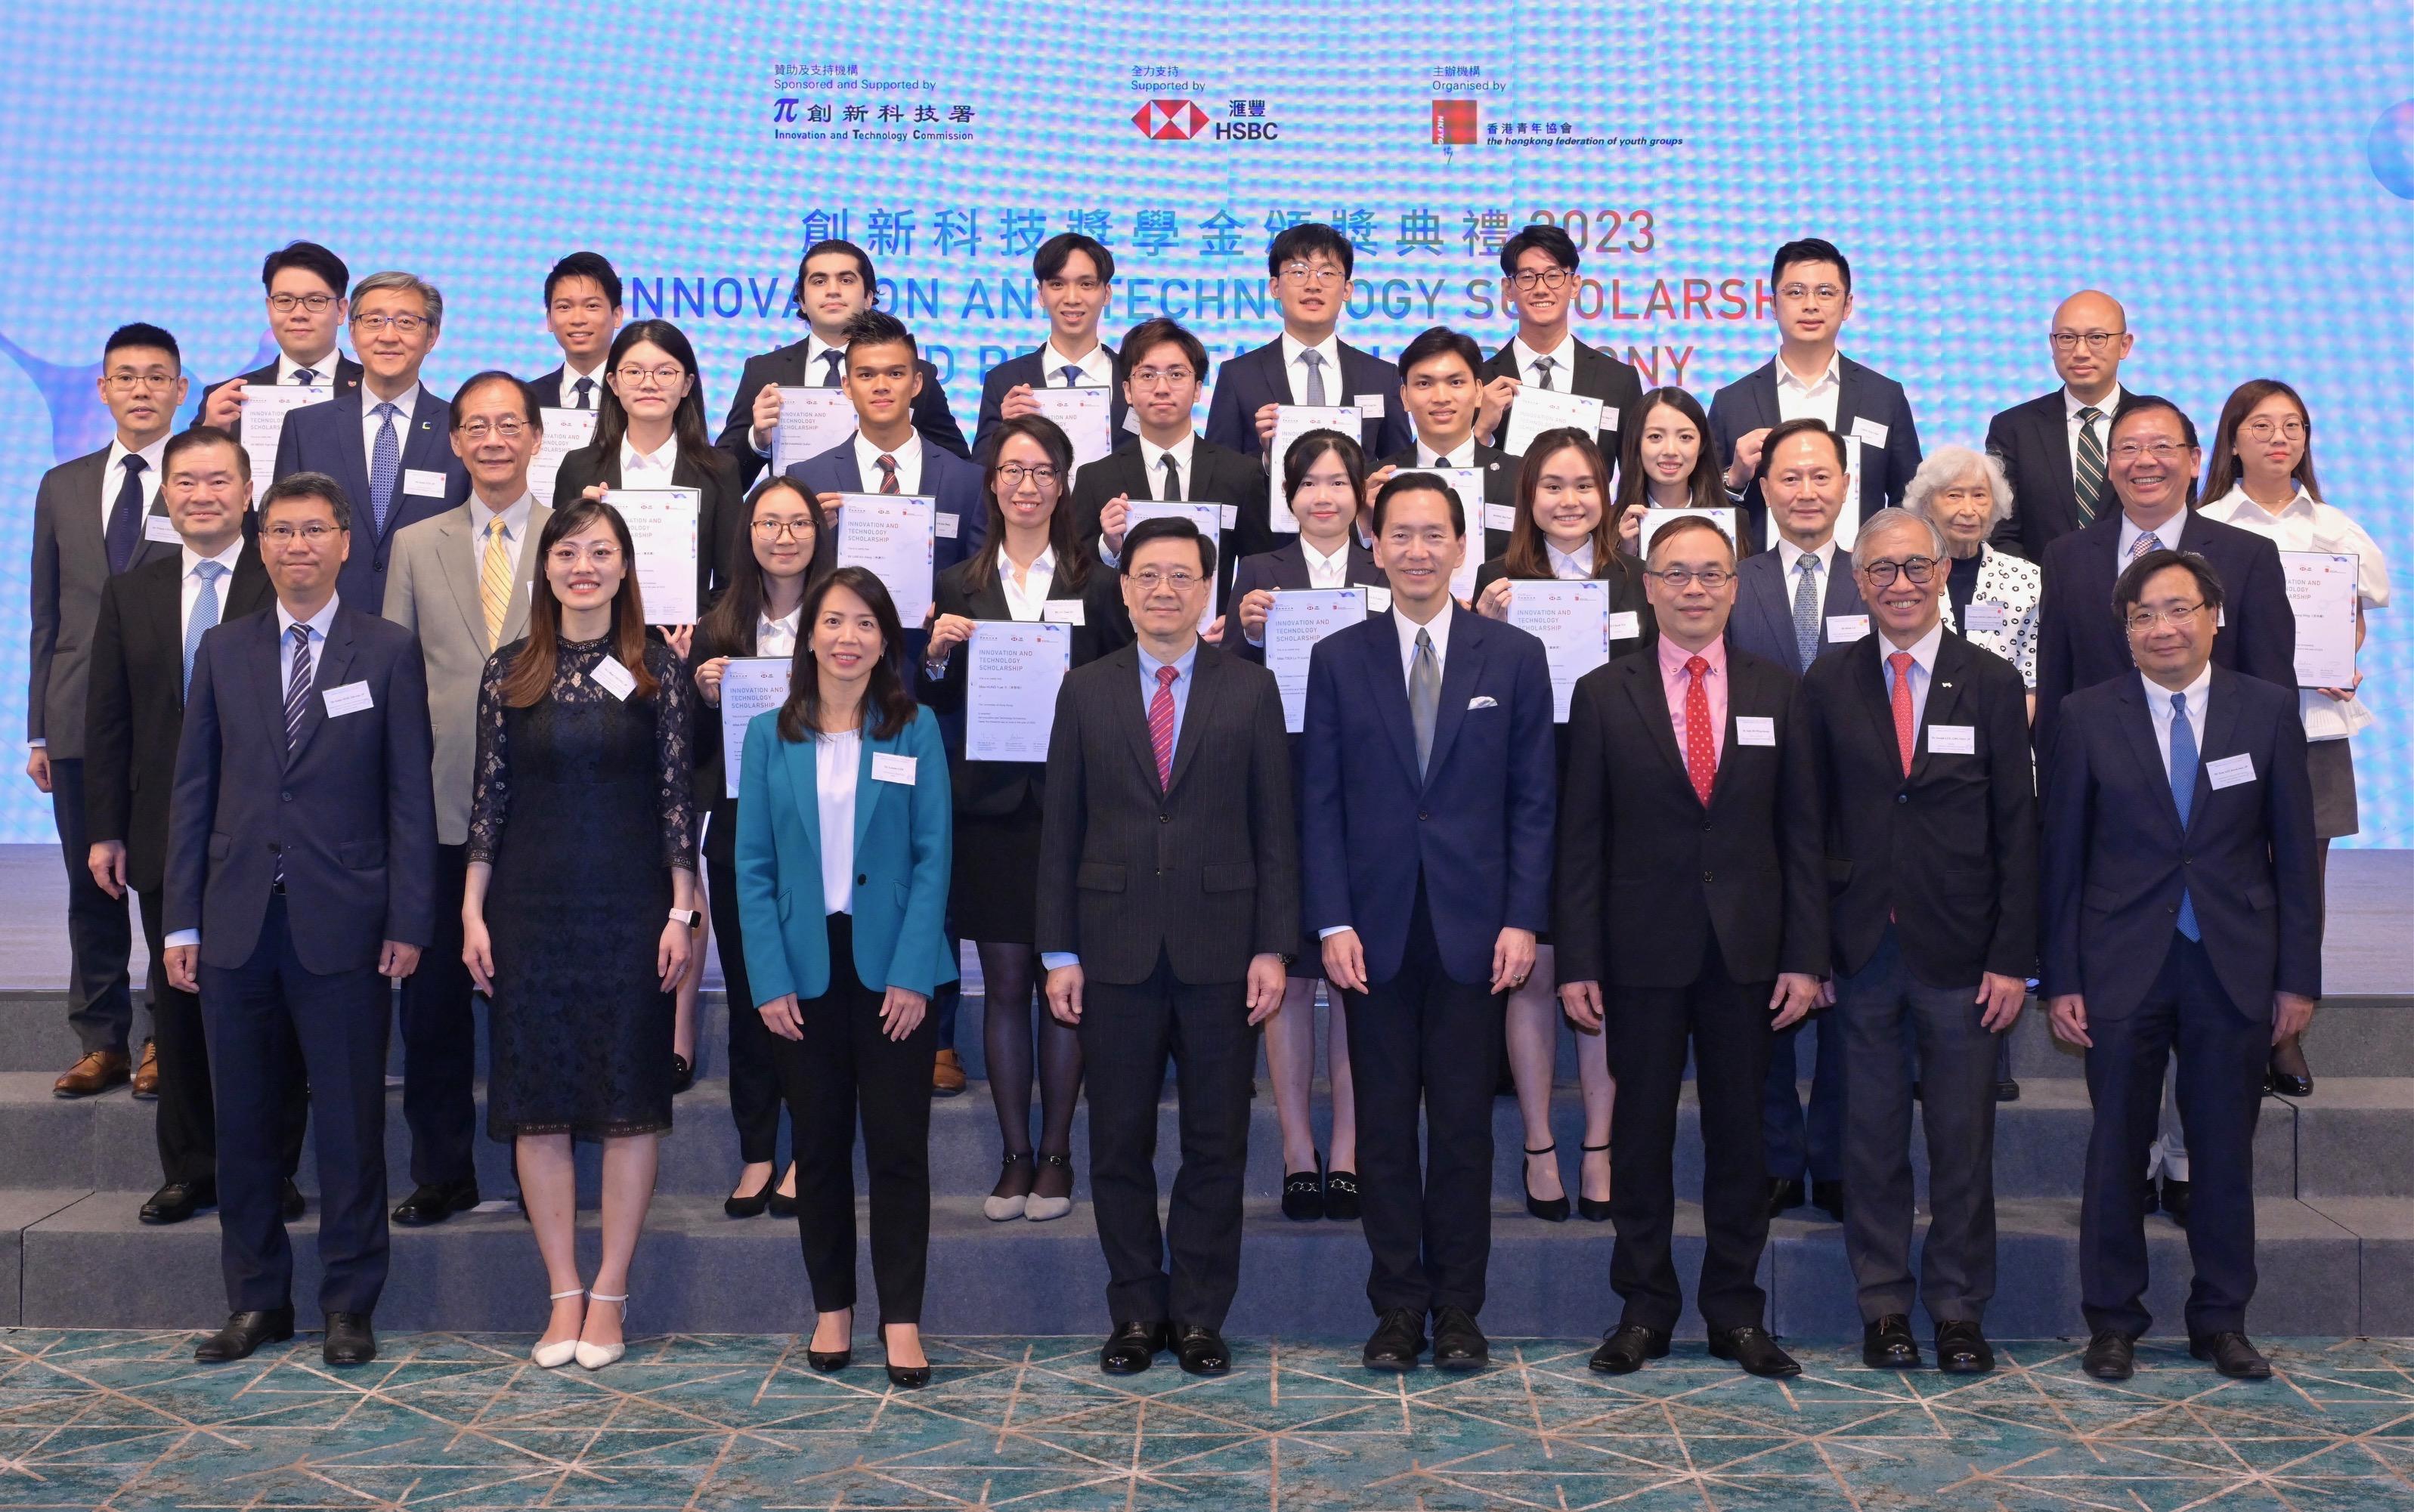 The Chief Executive, Mr John Lee, attended the Innovation and Technology Scholarship Award Presentation Ceremony 2023 today (June 13). Photo shows (first row, from second left) the Acting Secretary for Innovation, Technology and Industry, Ms Lillian Cheong; the Chief Executive, Hong Kong of the Hongkong and Shanghai Banking Corporation Limited, Ms Luanne Lim; Mr Lee; the Chairman of the Awardee Selection Committee of the Innovation and Technology Scholarship, Mr Bernard Chan; the Executive Director of the Hong Kong Federation of Youth Groups, Mr Andy Ho; the Chairman of the Scholarship Administration Committee of the Innovation and Technology Scholarship, Dr Joseph Lee, and other guests with the awardees.